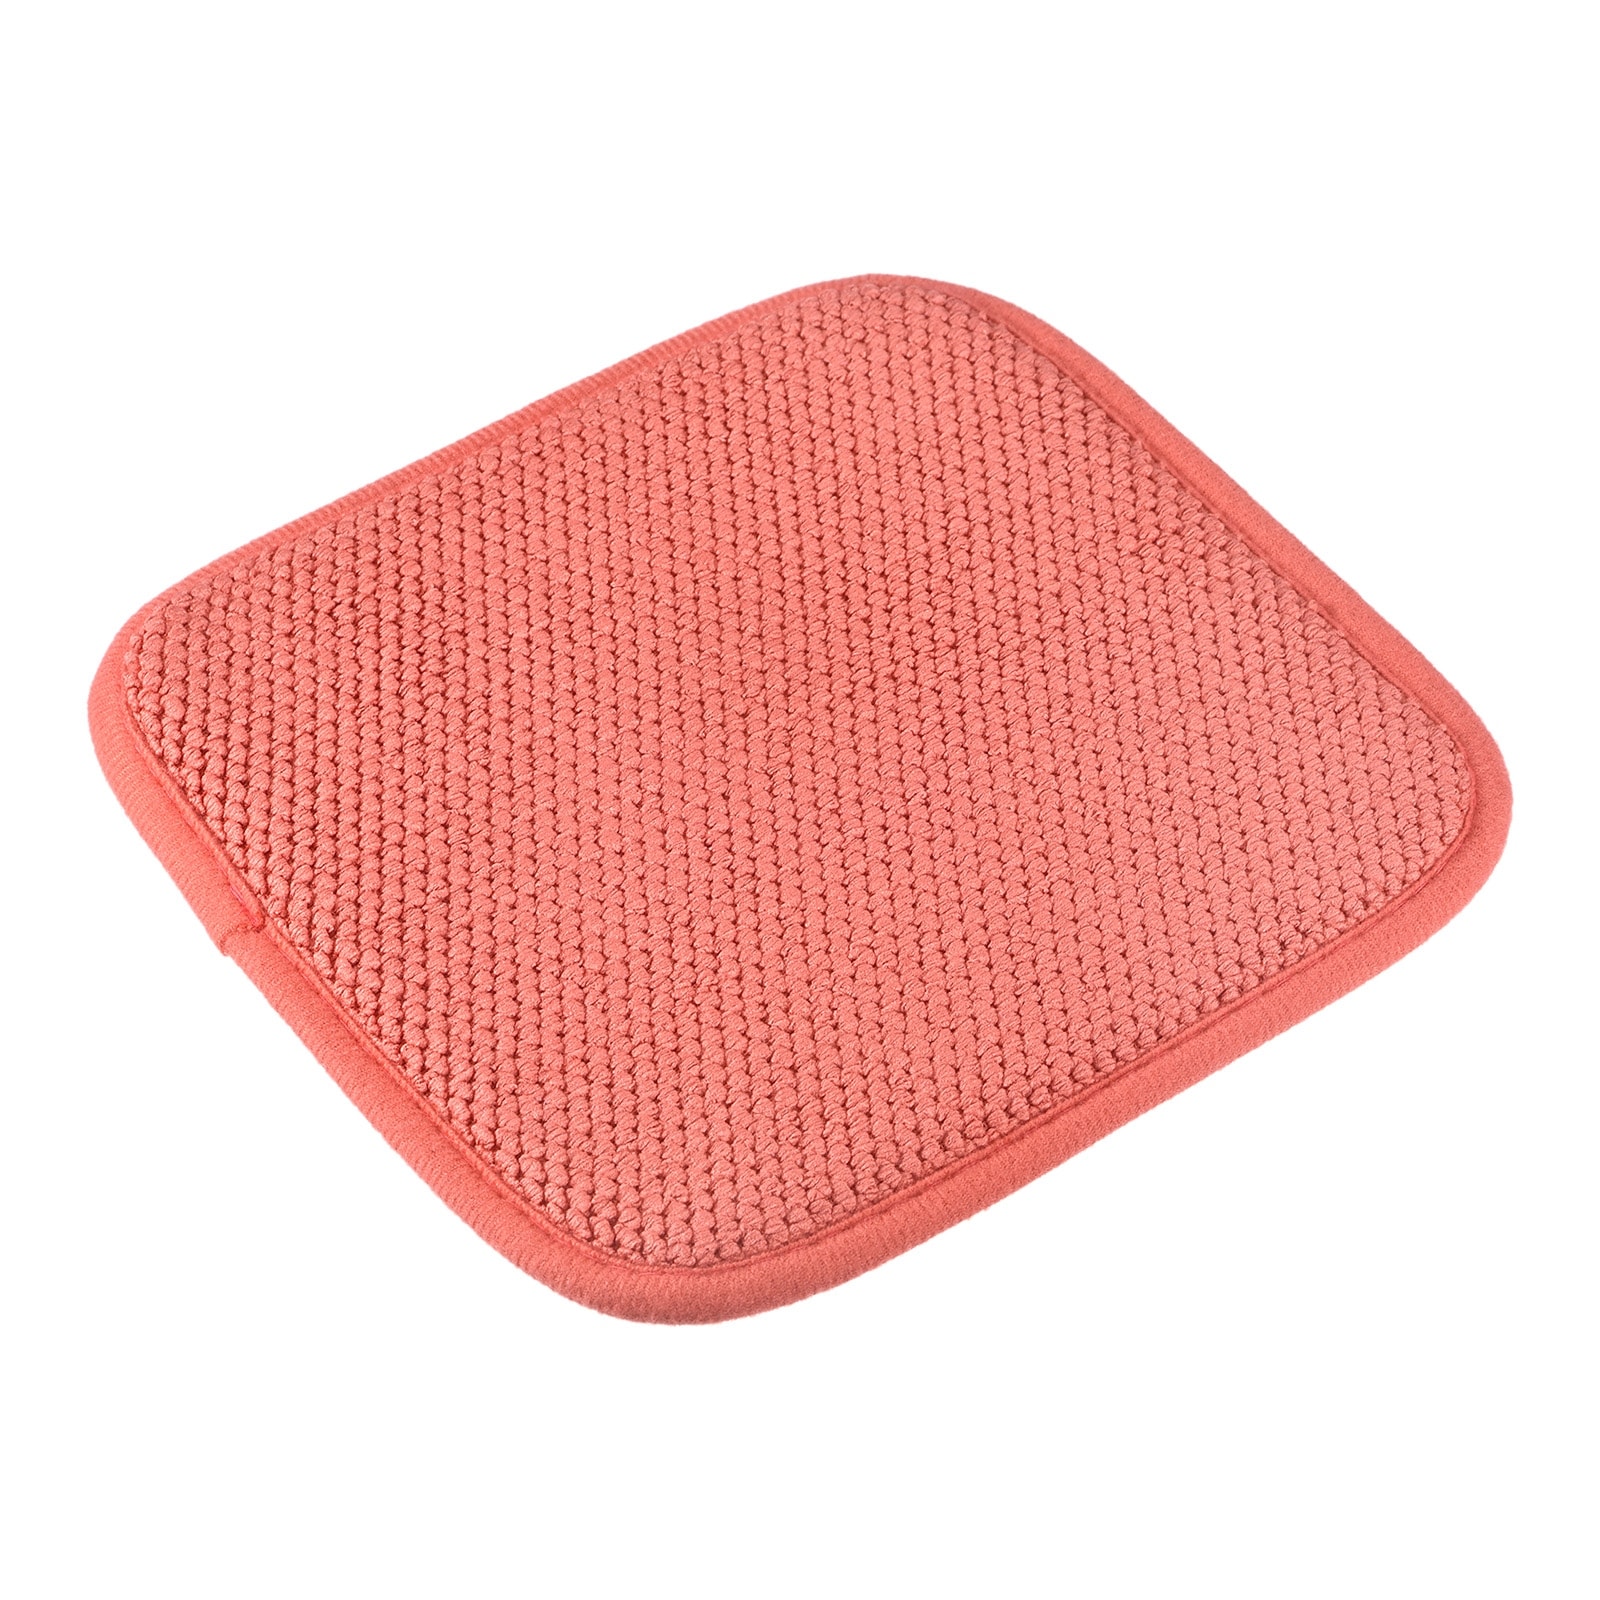 https://ak1.ostkcdn.com/images/products/is/images/direct/06a28addf9daceb11b58c00fb21a334295eb5613/2pcs-Dish-Drying-Mat-Microfiber-Dishes-Drainer-Mats-Dish-Drying-Pad-Red.jpg